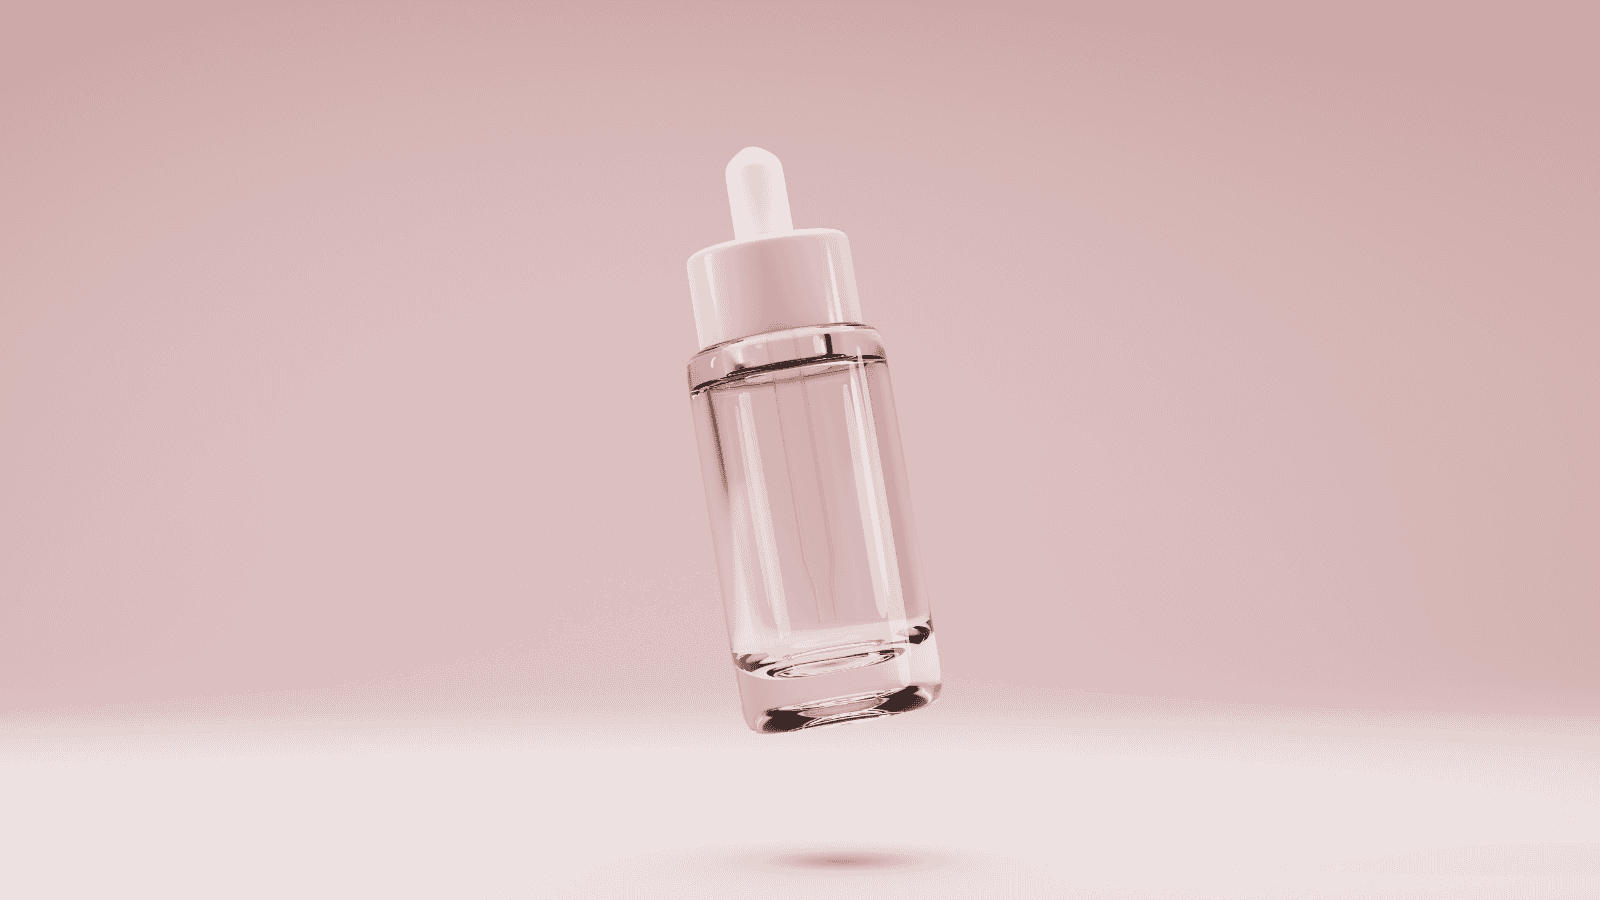 Anti-aging serums to look younger